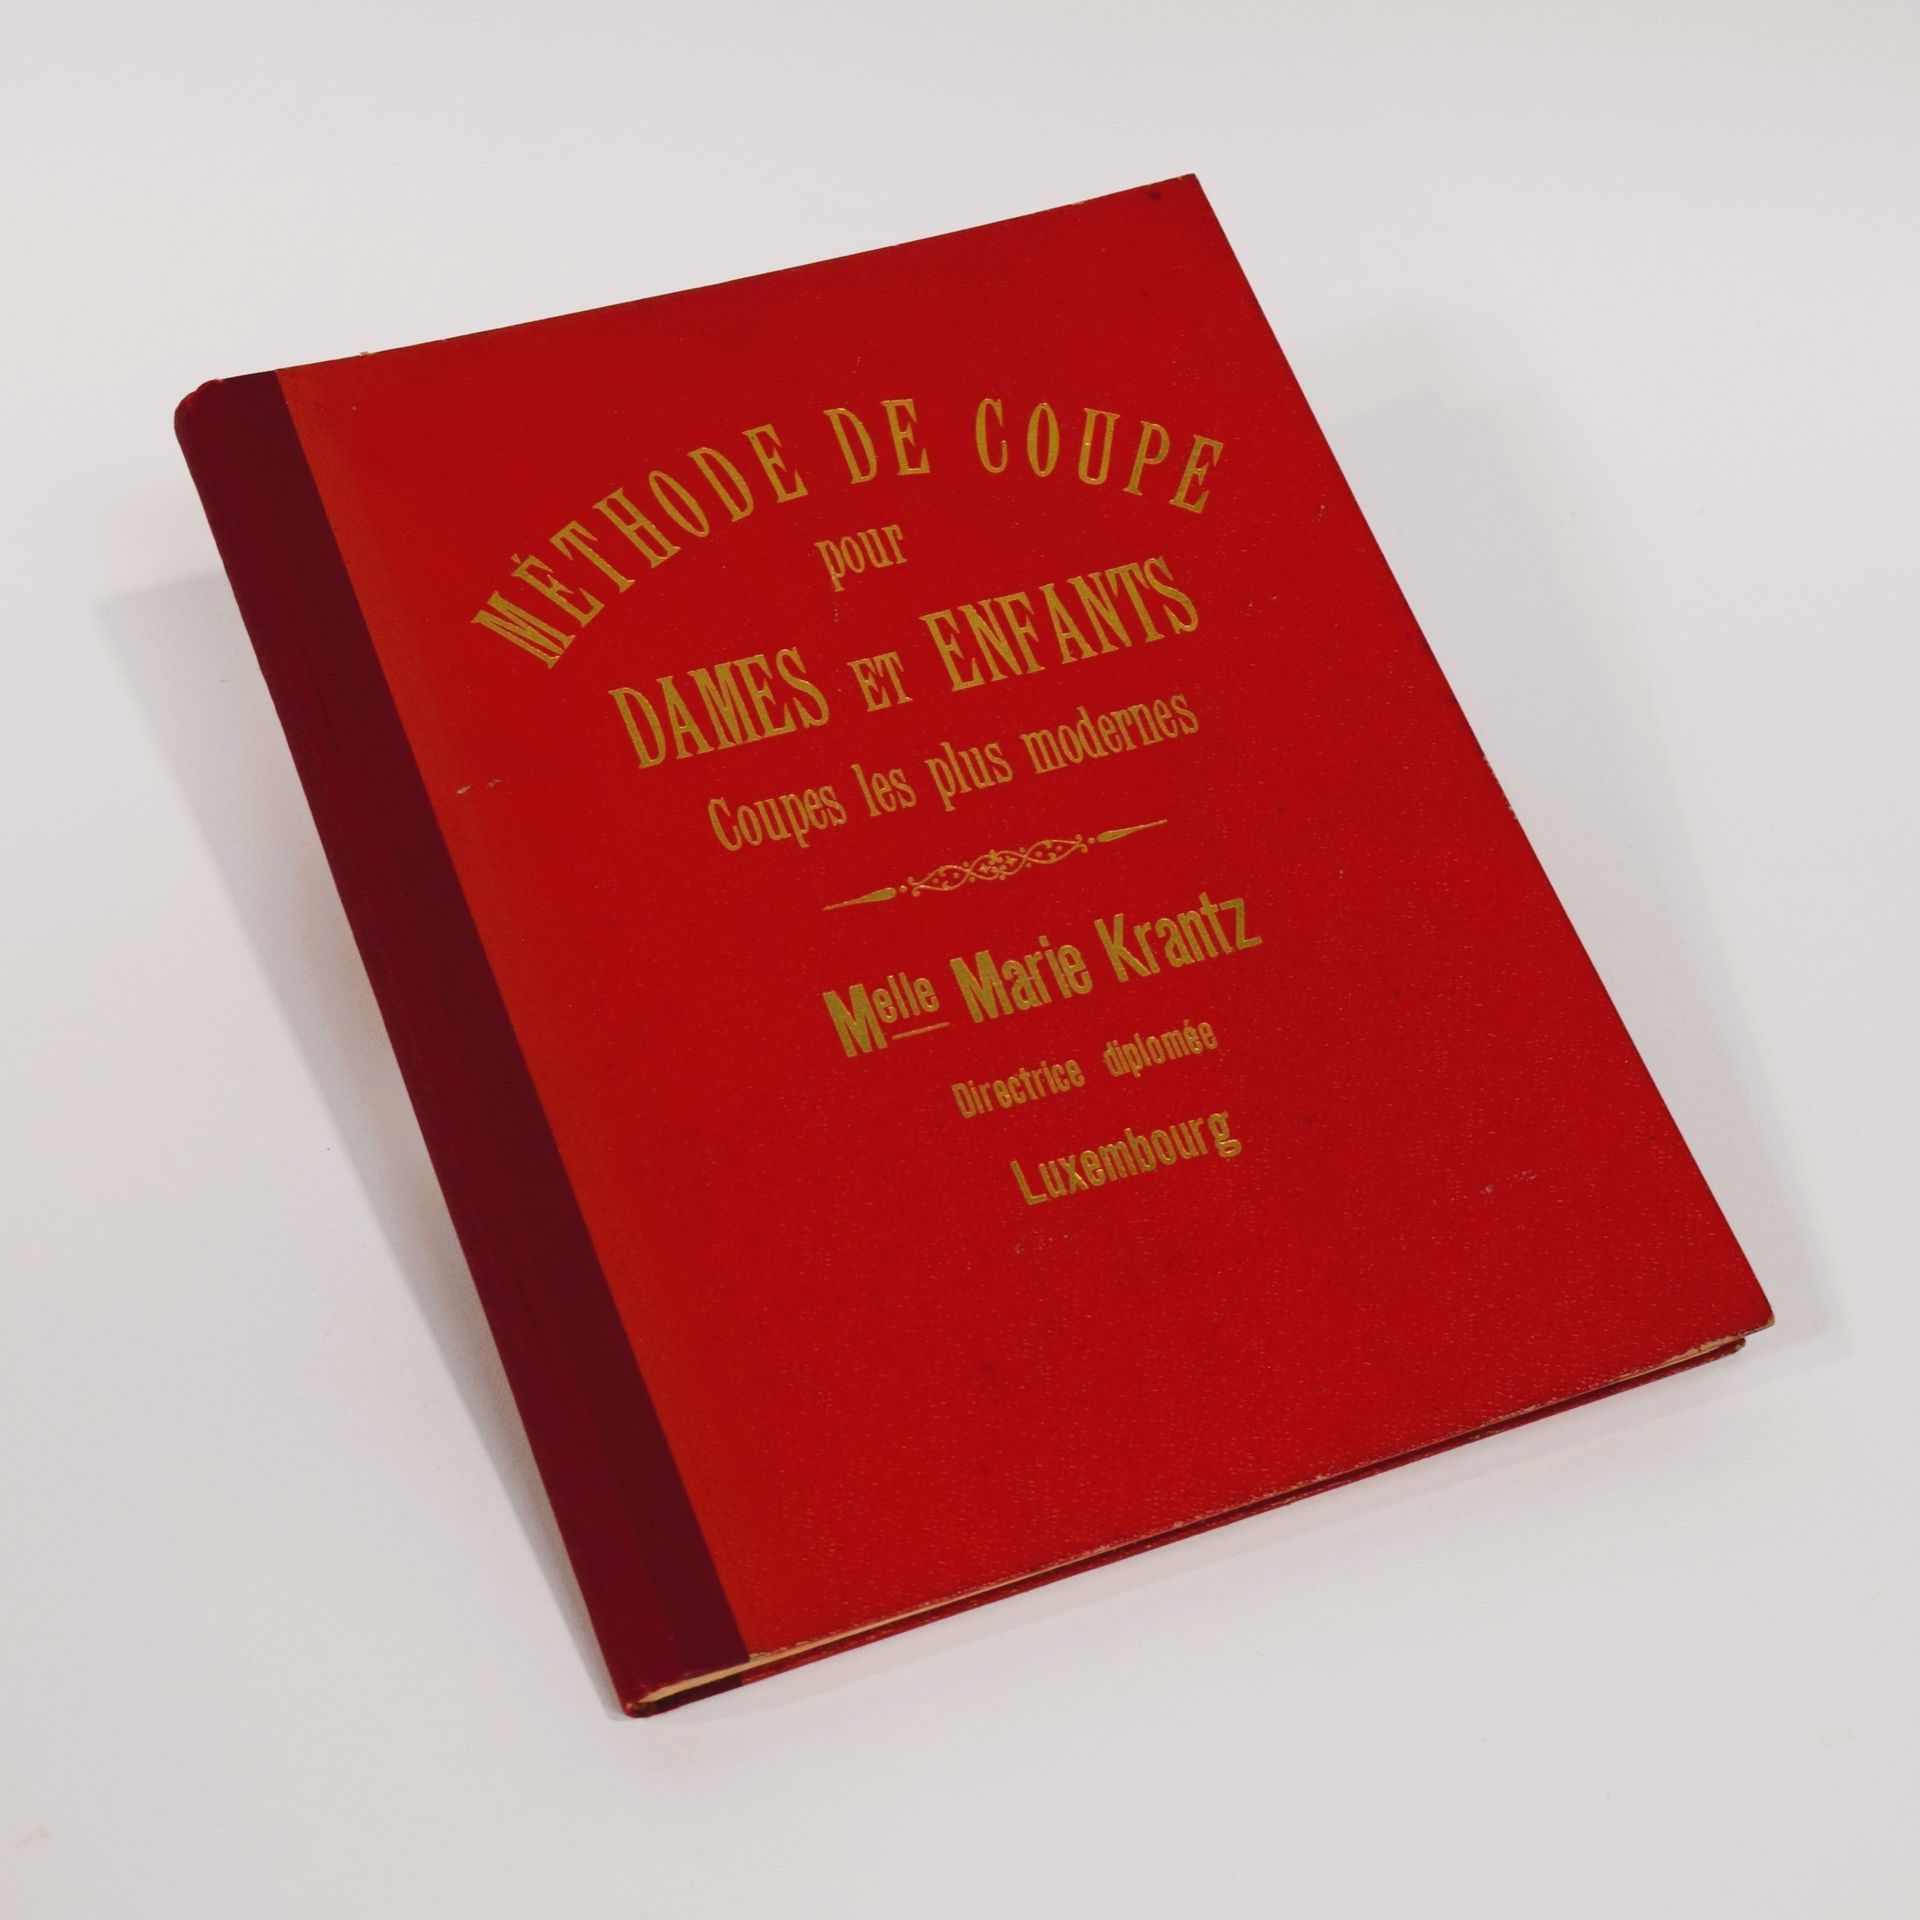 Null (COMMERCE) Blank book of notes from Mademoiselle Marie KRANTZ's course, "Mé&hellip;